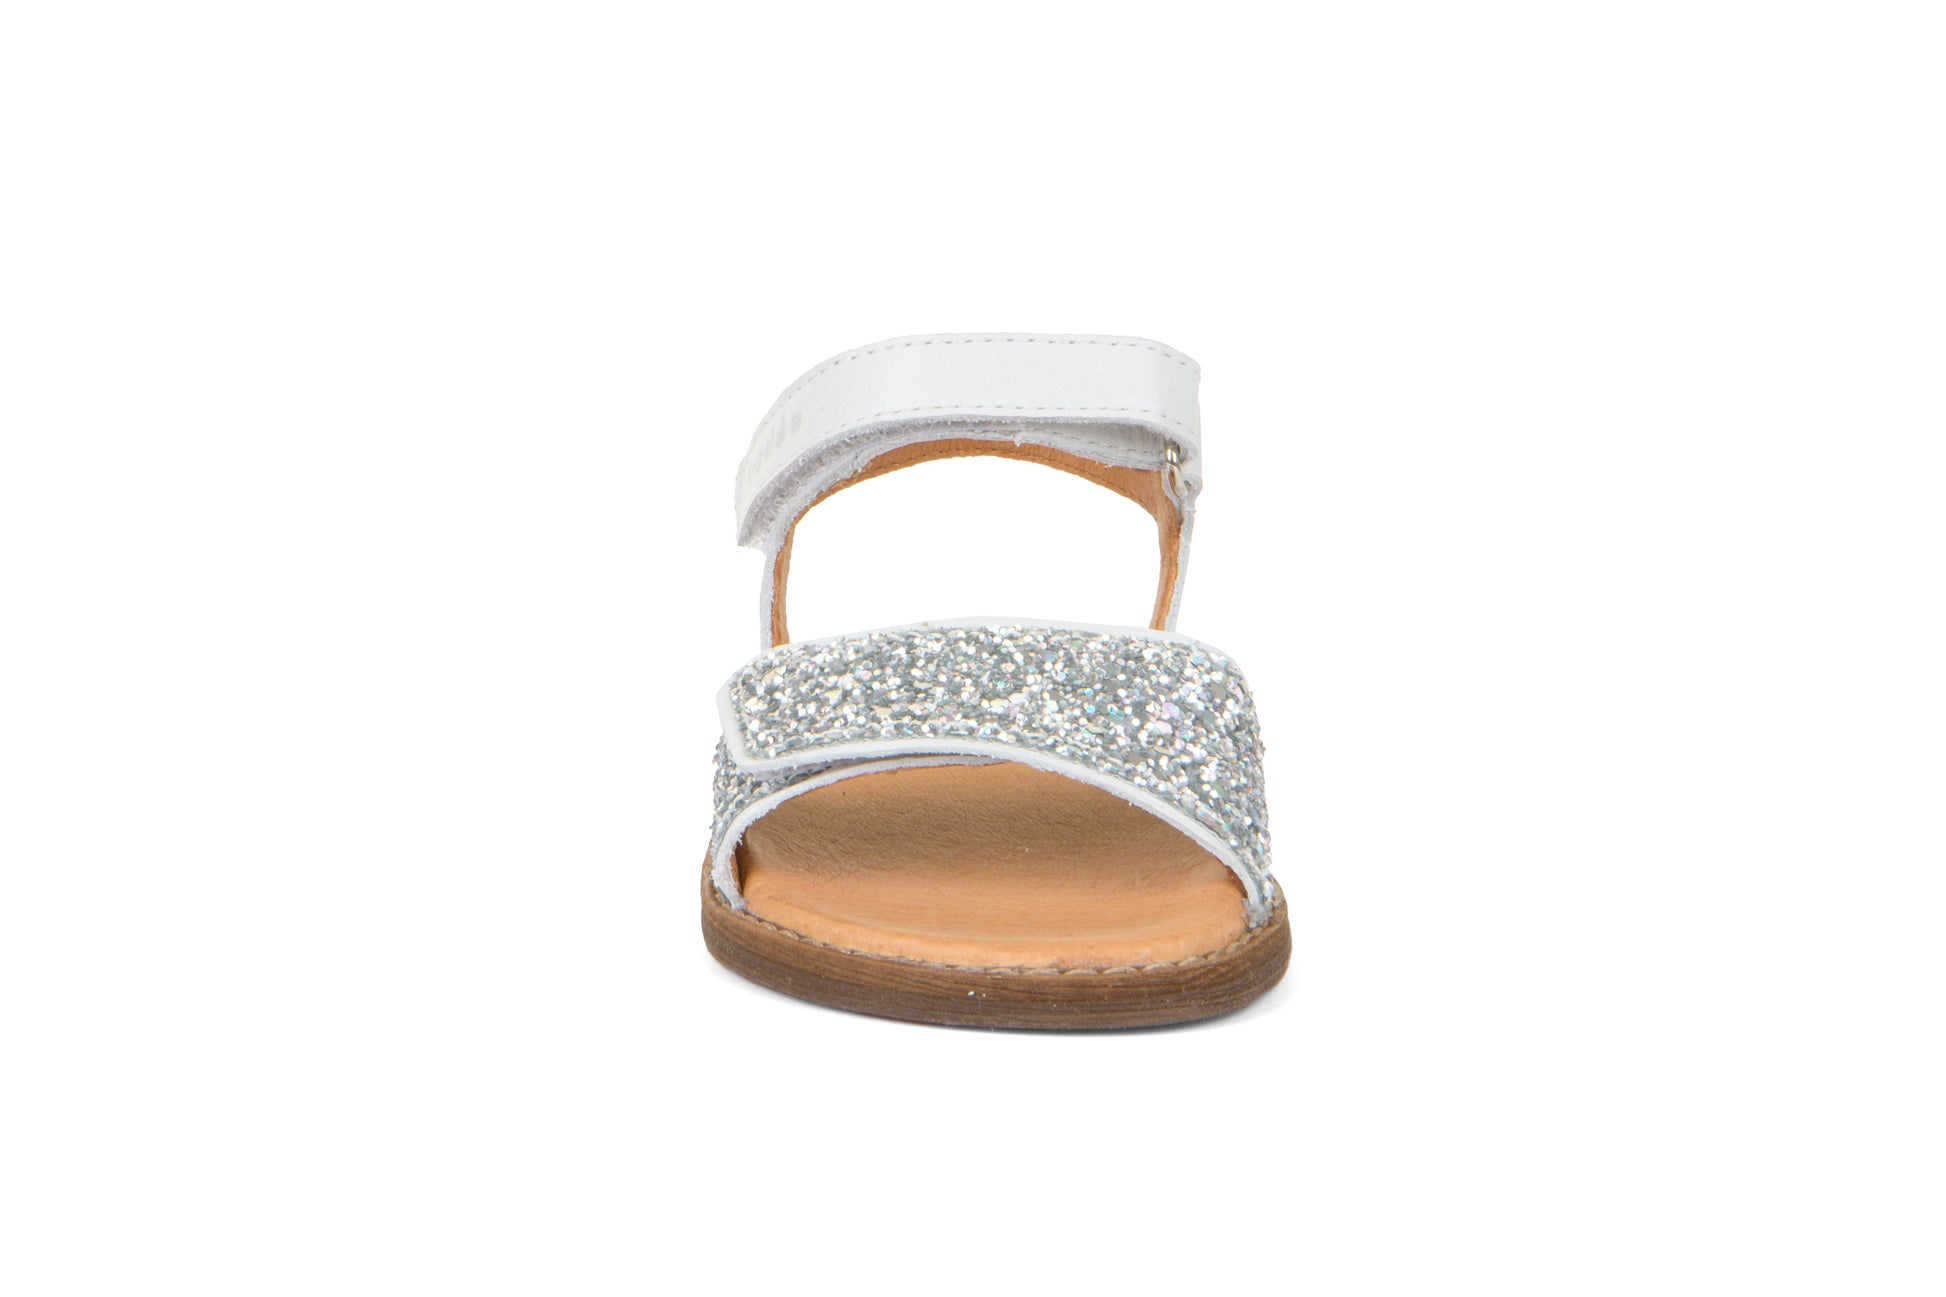 A girls sandal by Froddo, style G3150226-5 Lore Sparkle, in white with silver glitter front strap, velcro fastening. Front view.